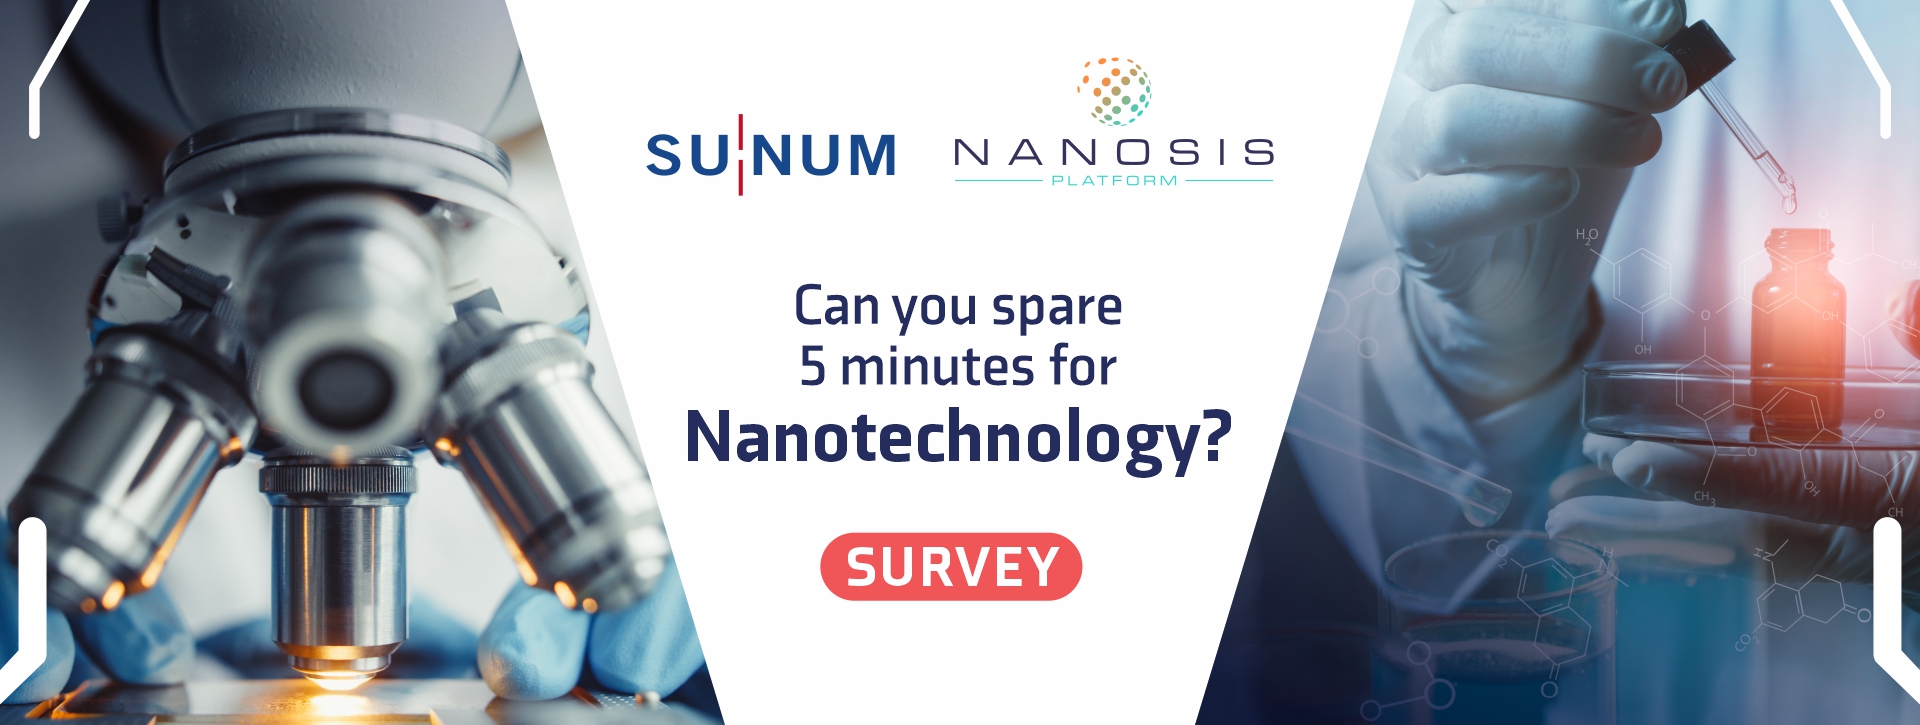 Can you spare 5 minutes for nanotechnology?